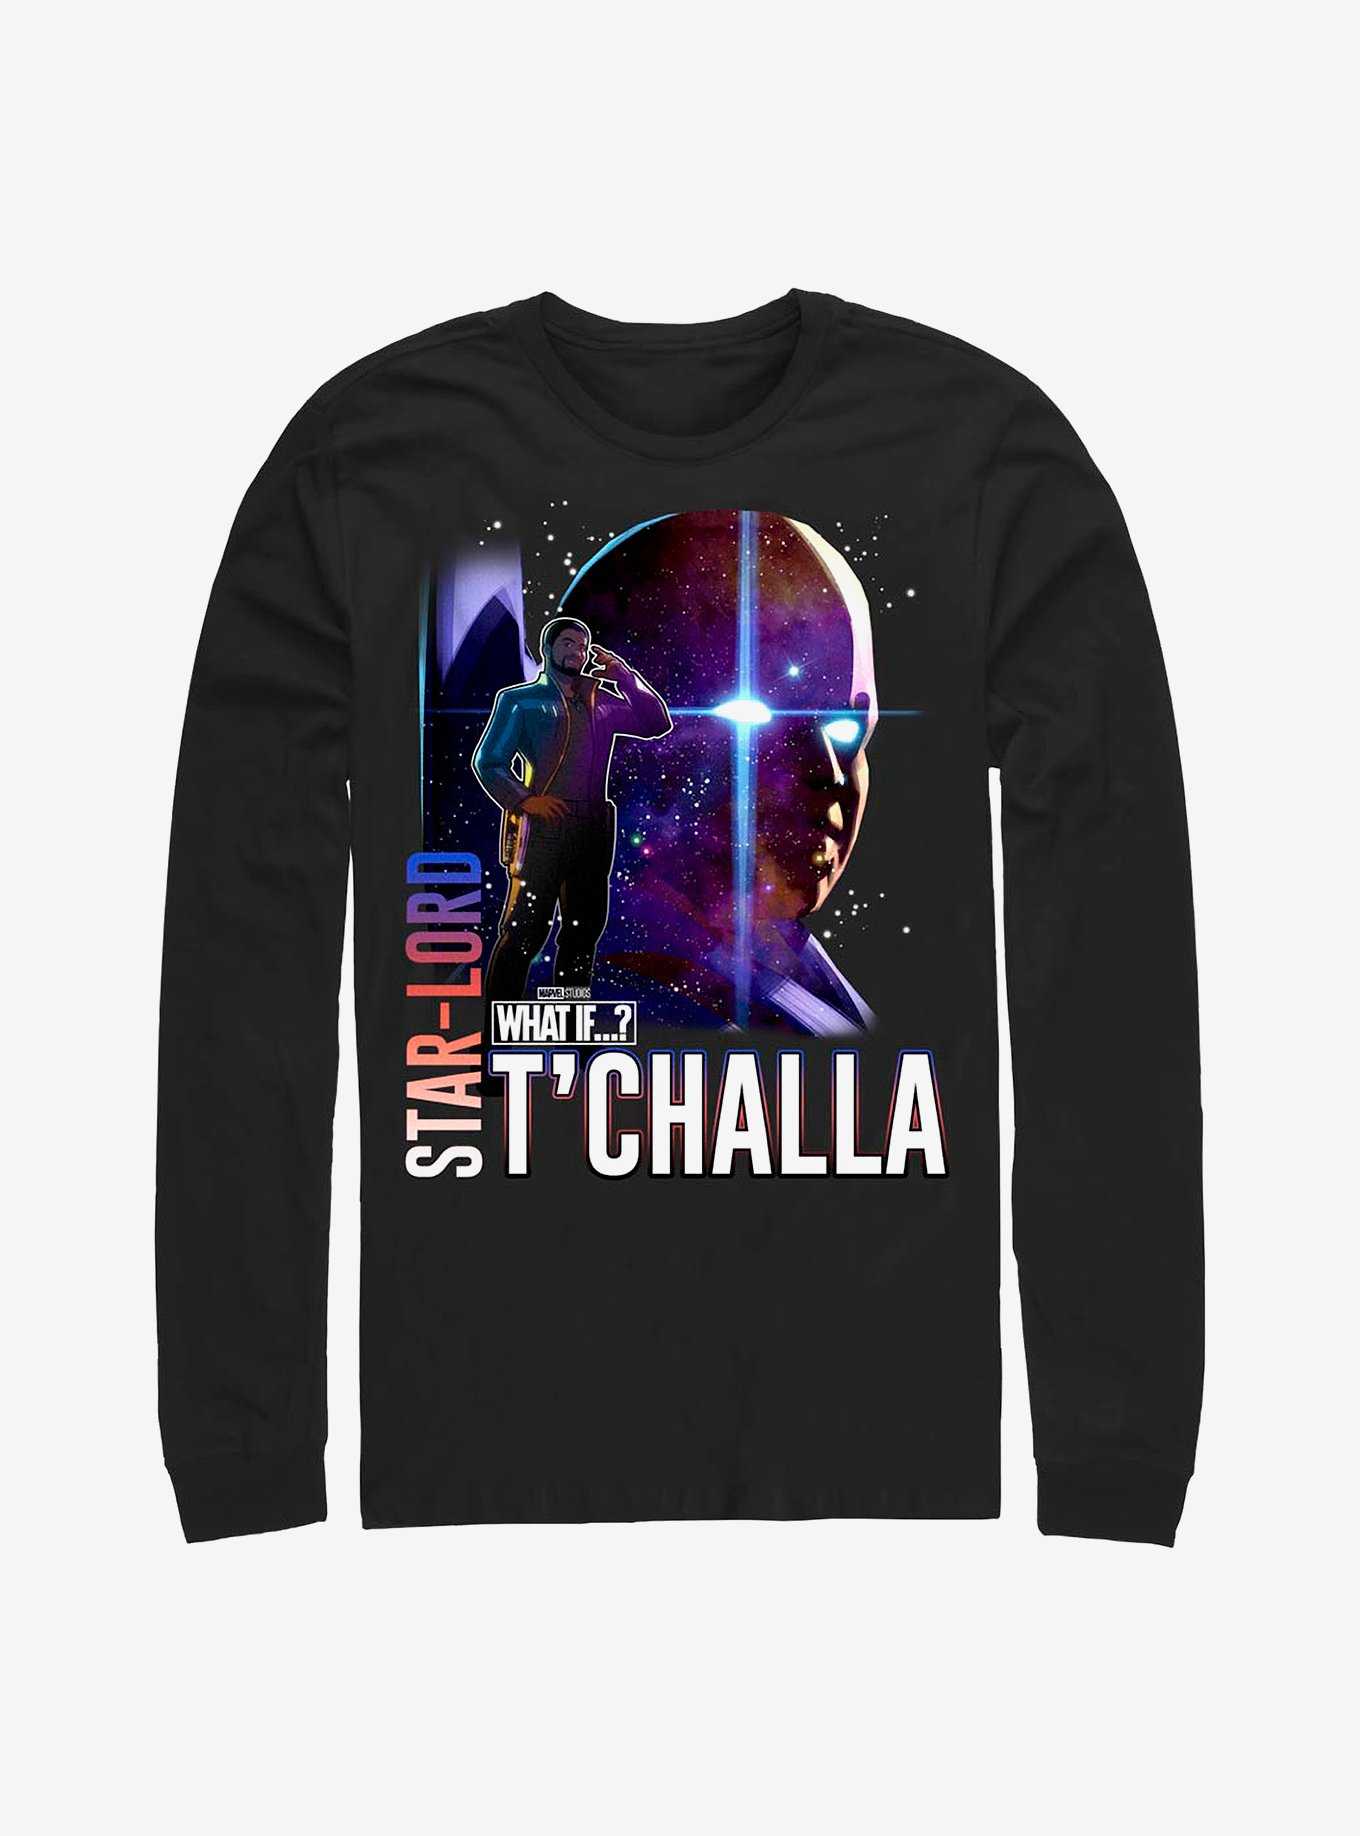 Marvel What If...? Star-Lord Watcher T'Challa Long-Sleeve T-Shirt, , hi-res